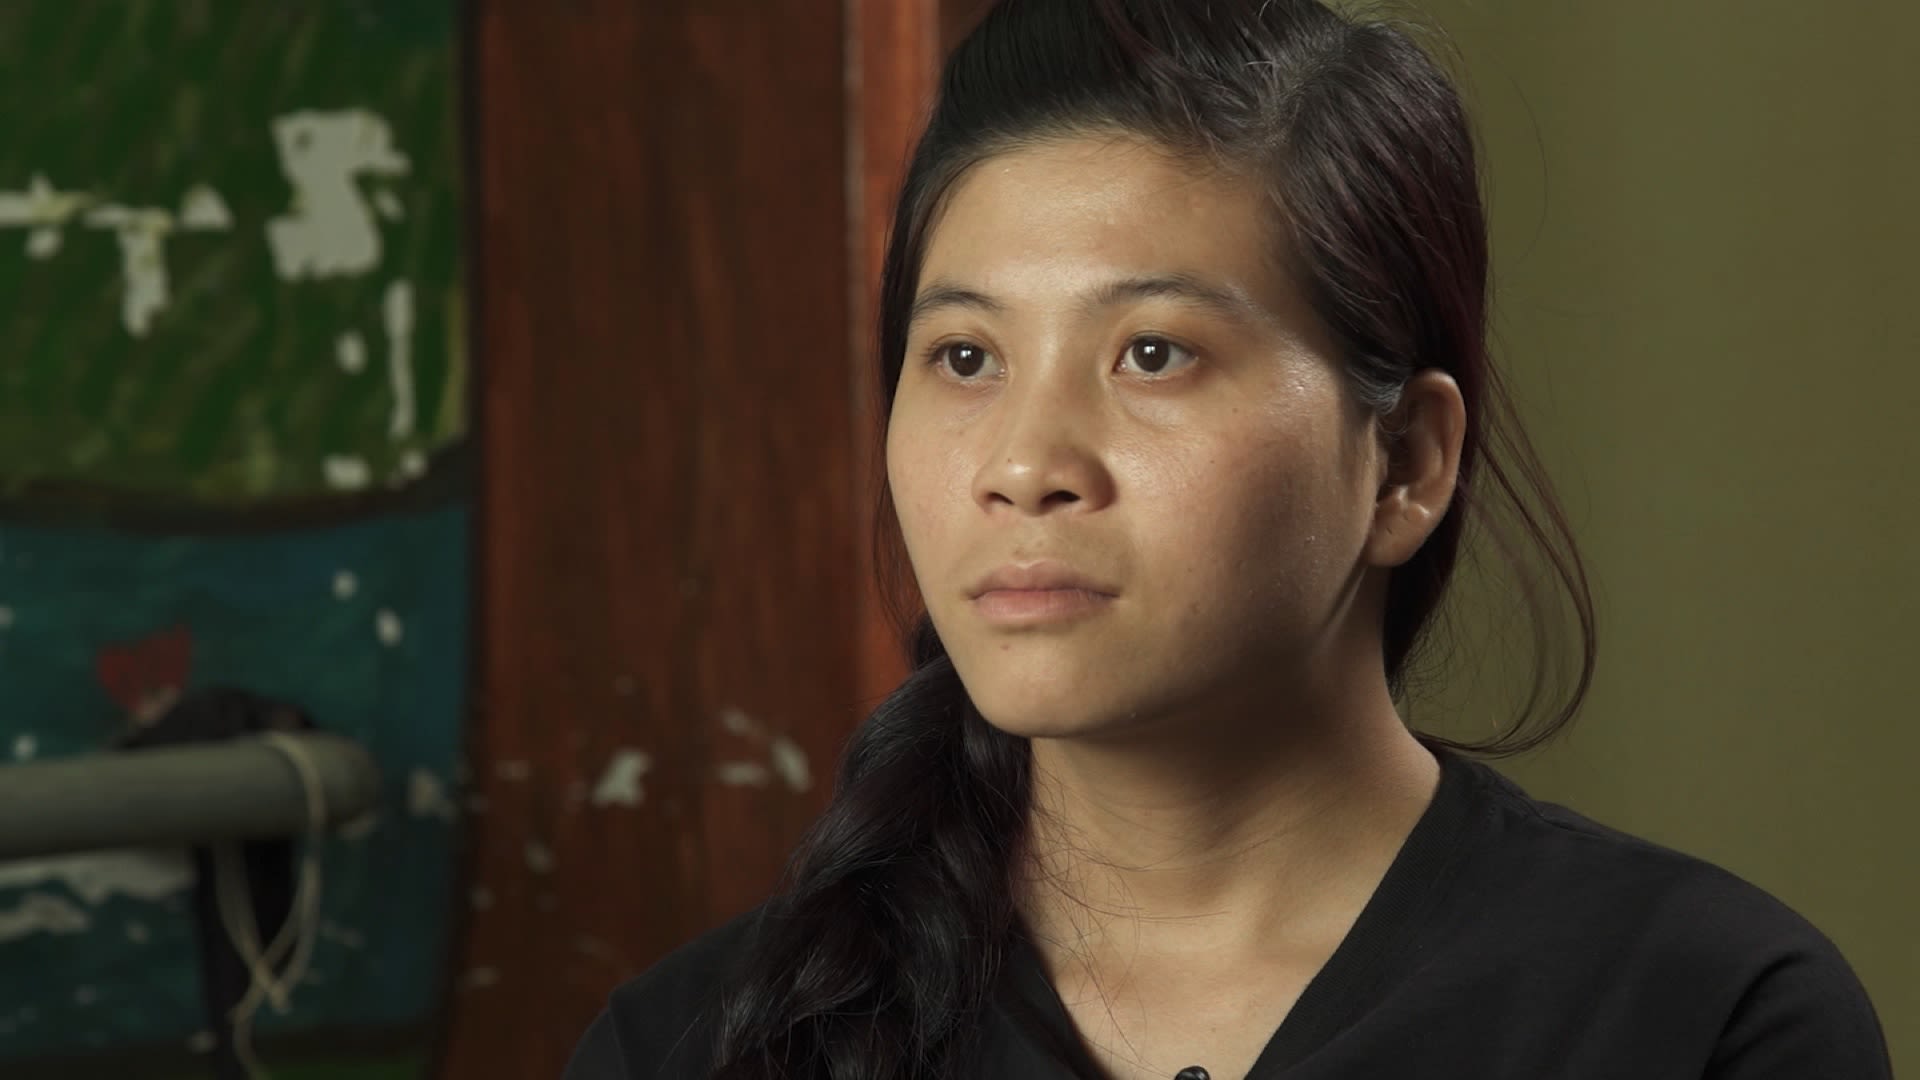 Cambodian Girls Sex Porn - The girls sold for sex by their mothers | CNN